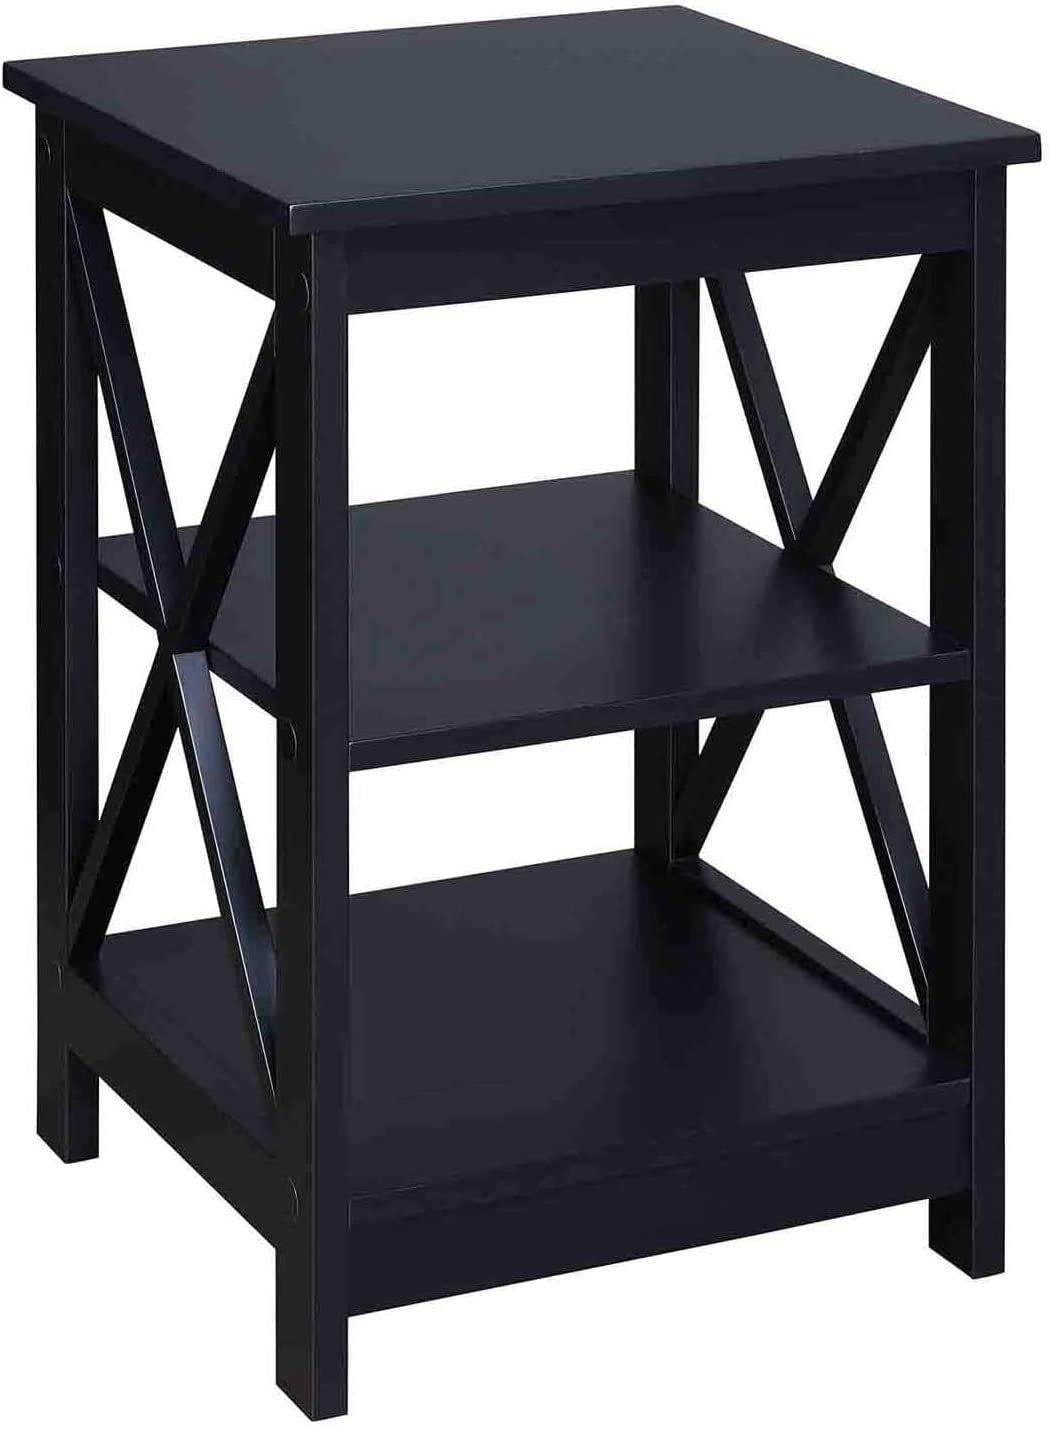 Convenience Concepts Oxford Transitional Living Room End Table